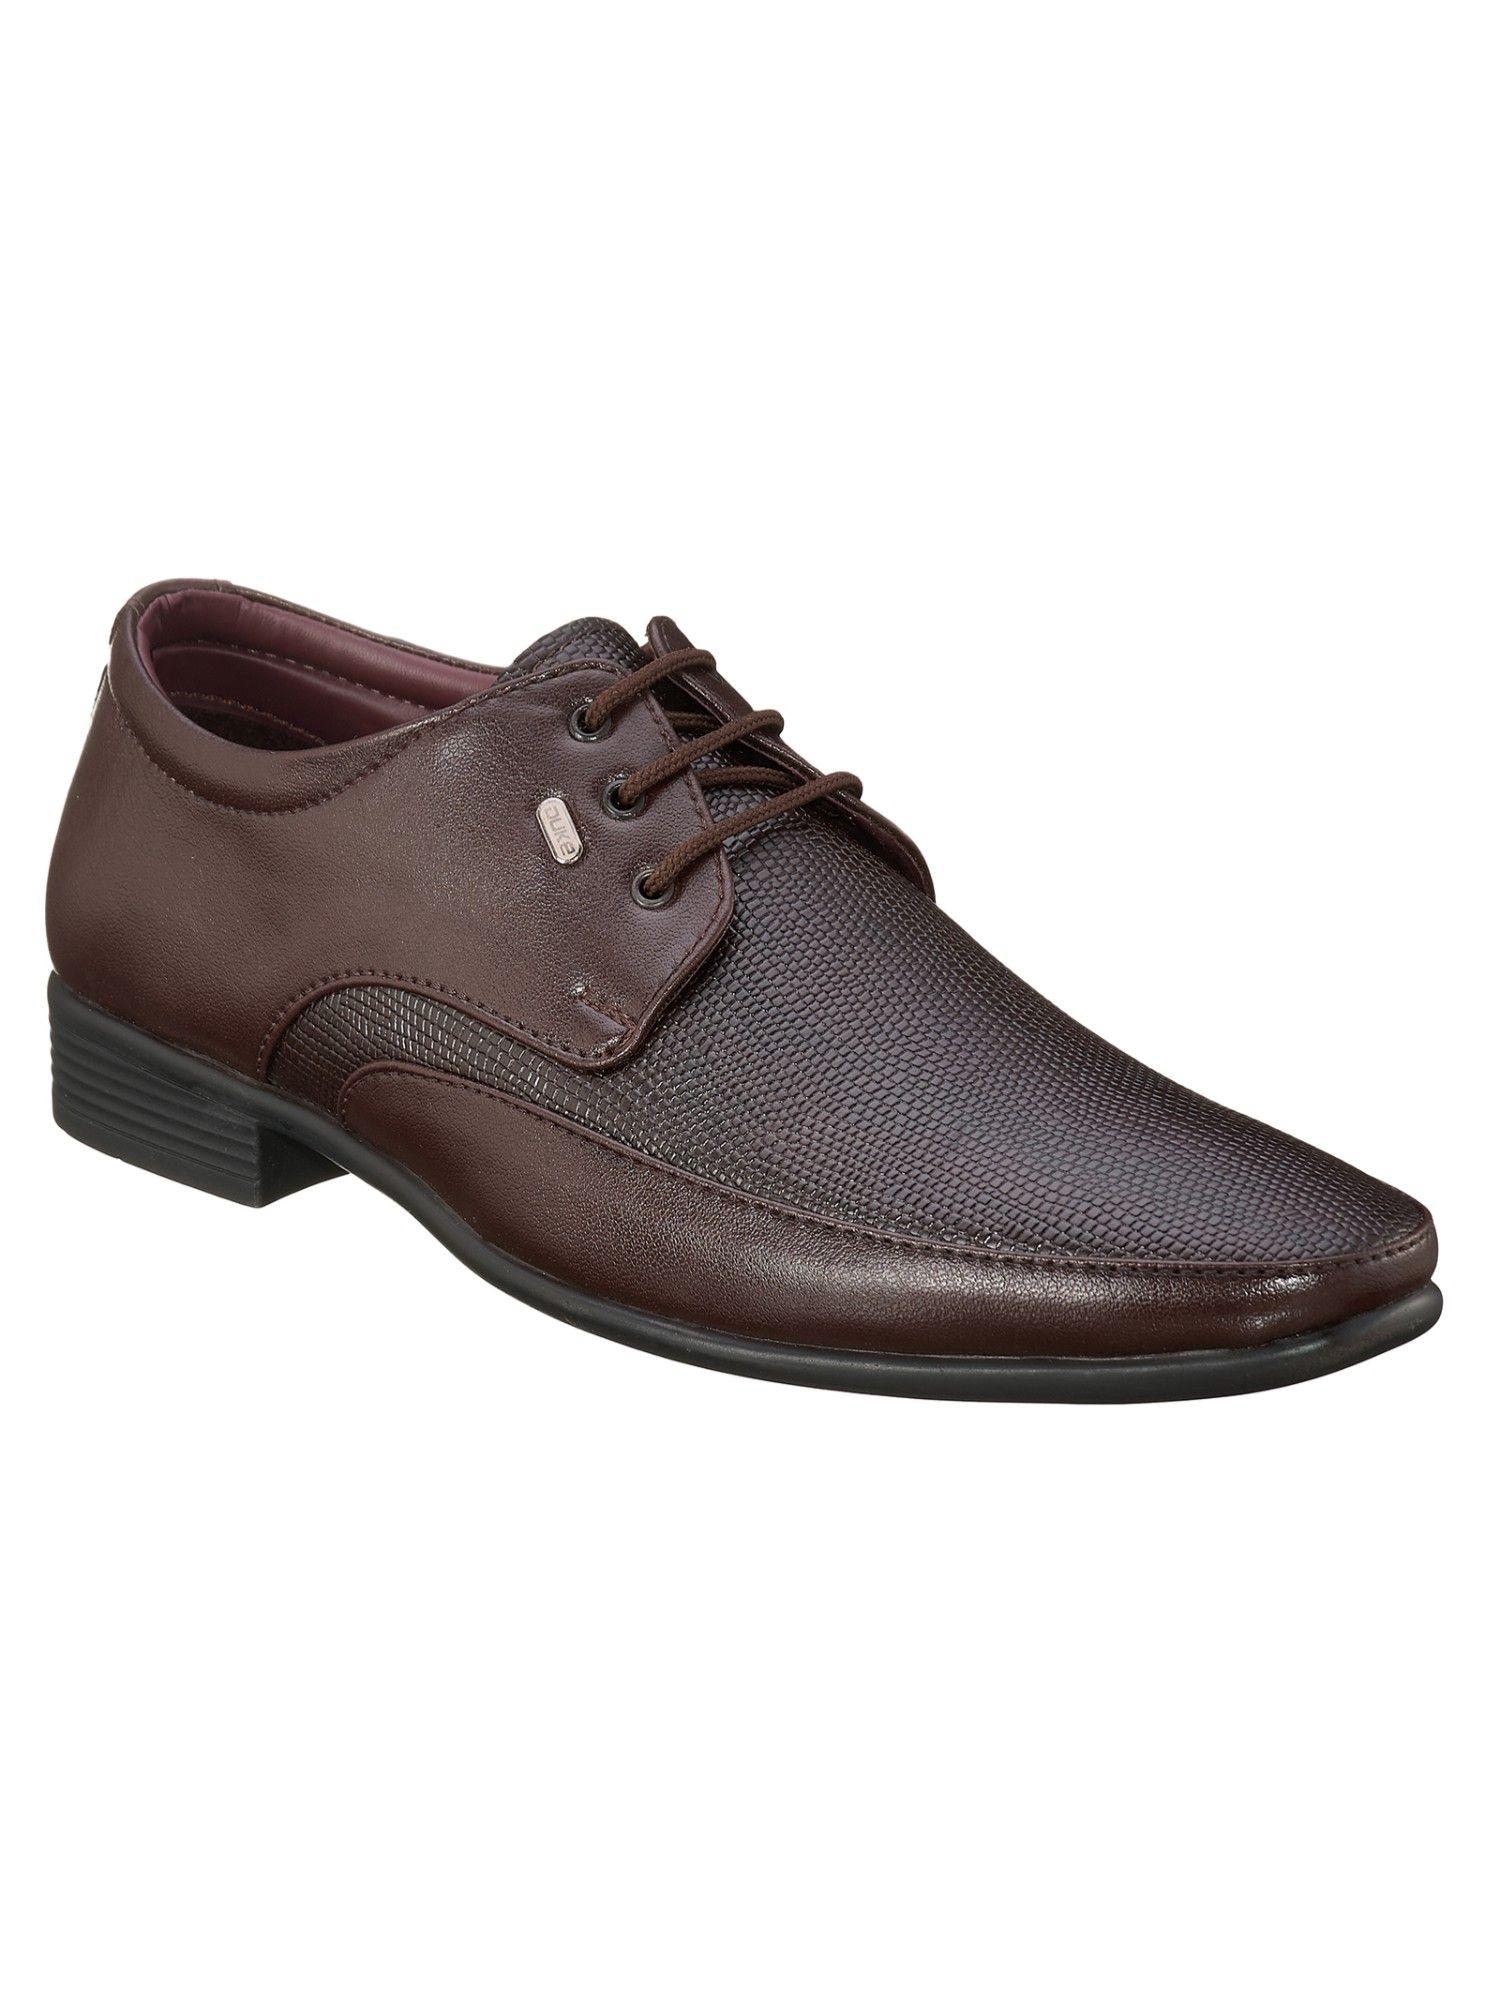 solid/plain brown formal shoes